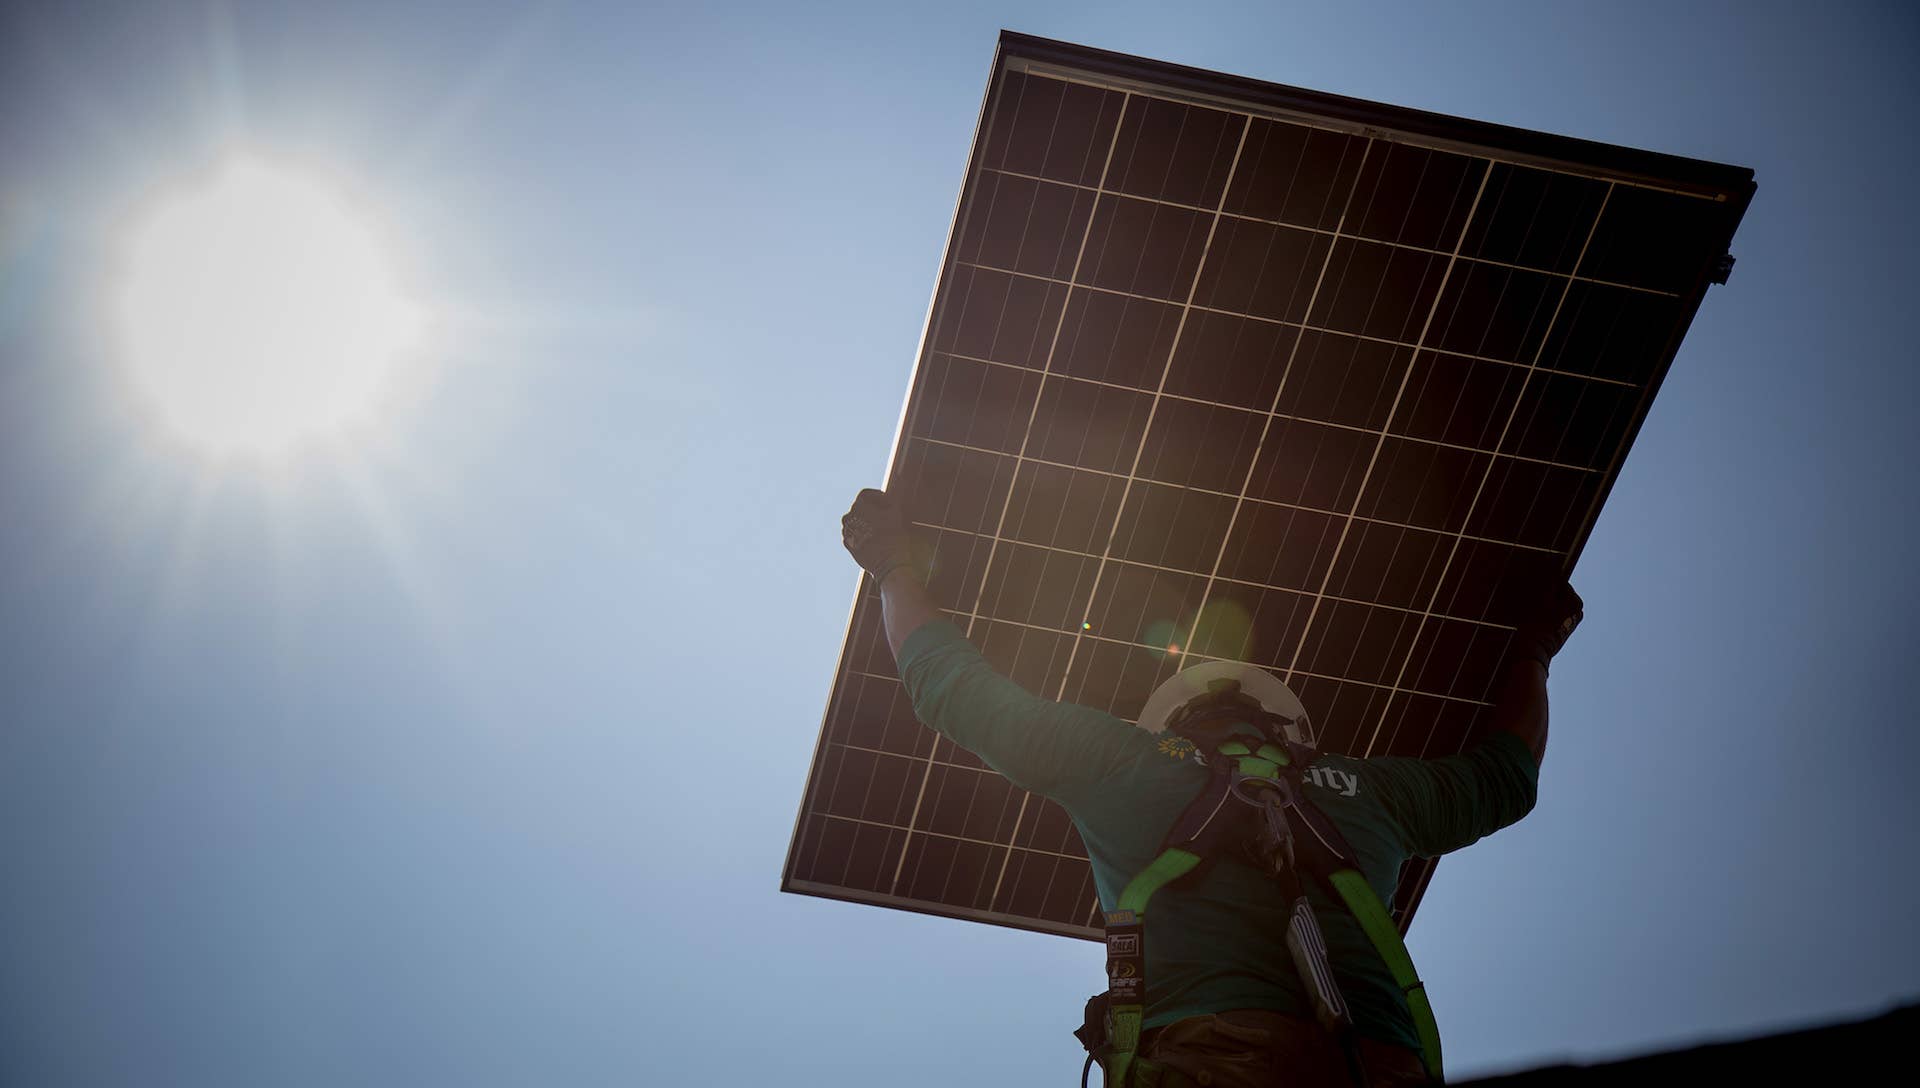 After Tesla Buyout, SolarCity Sheds Workers, Cuts CEO Salary to 1